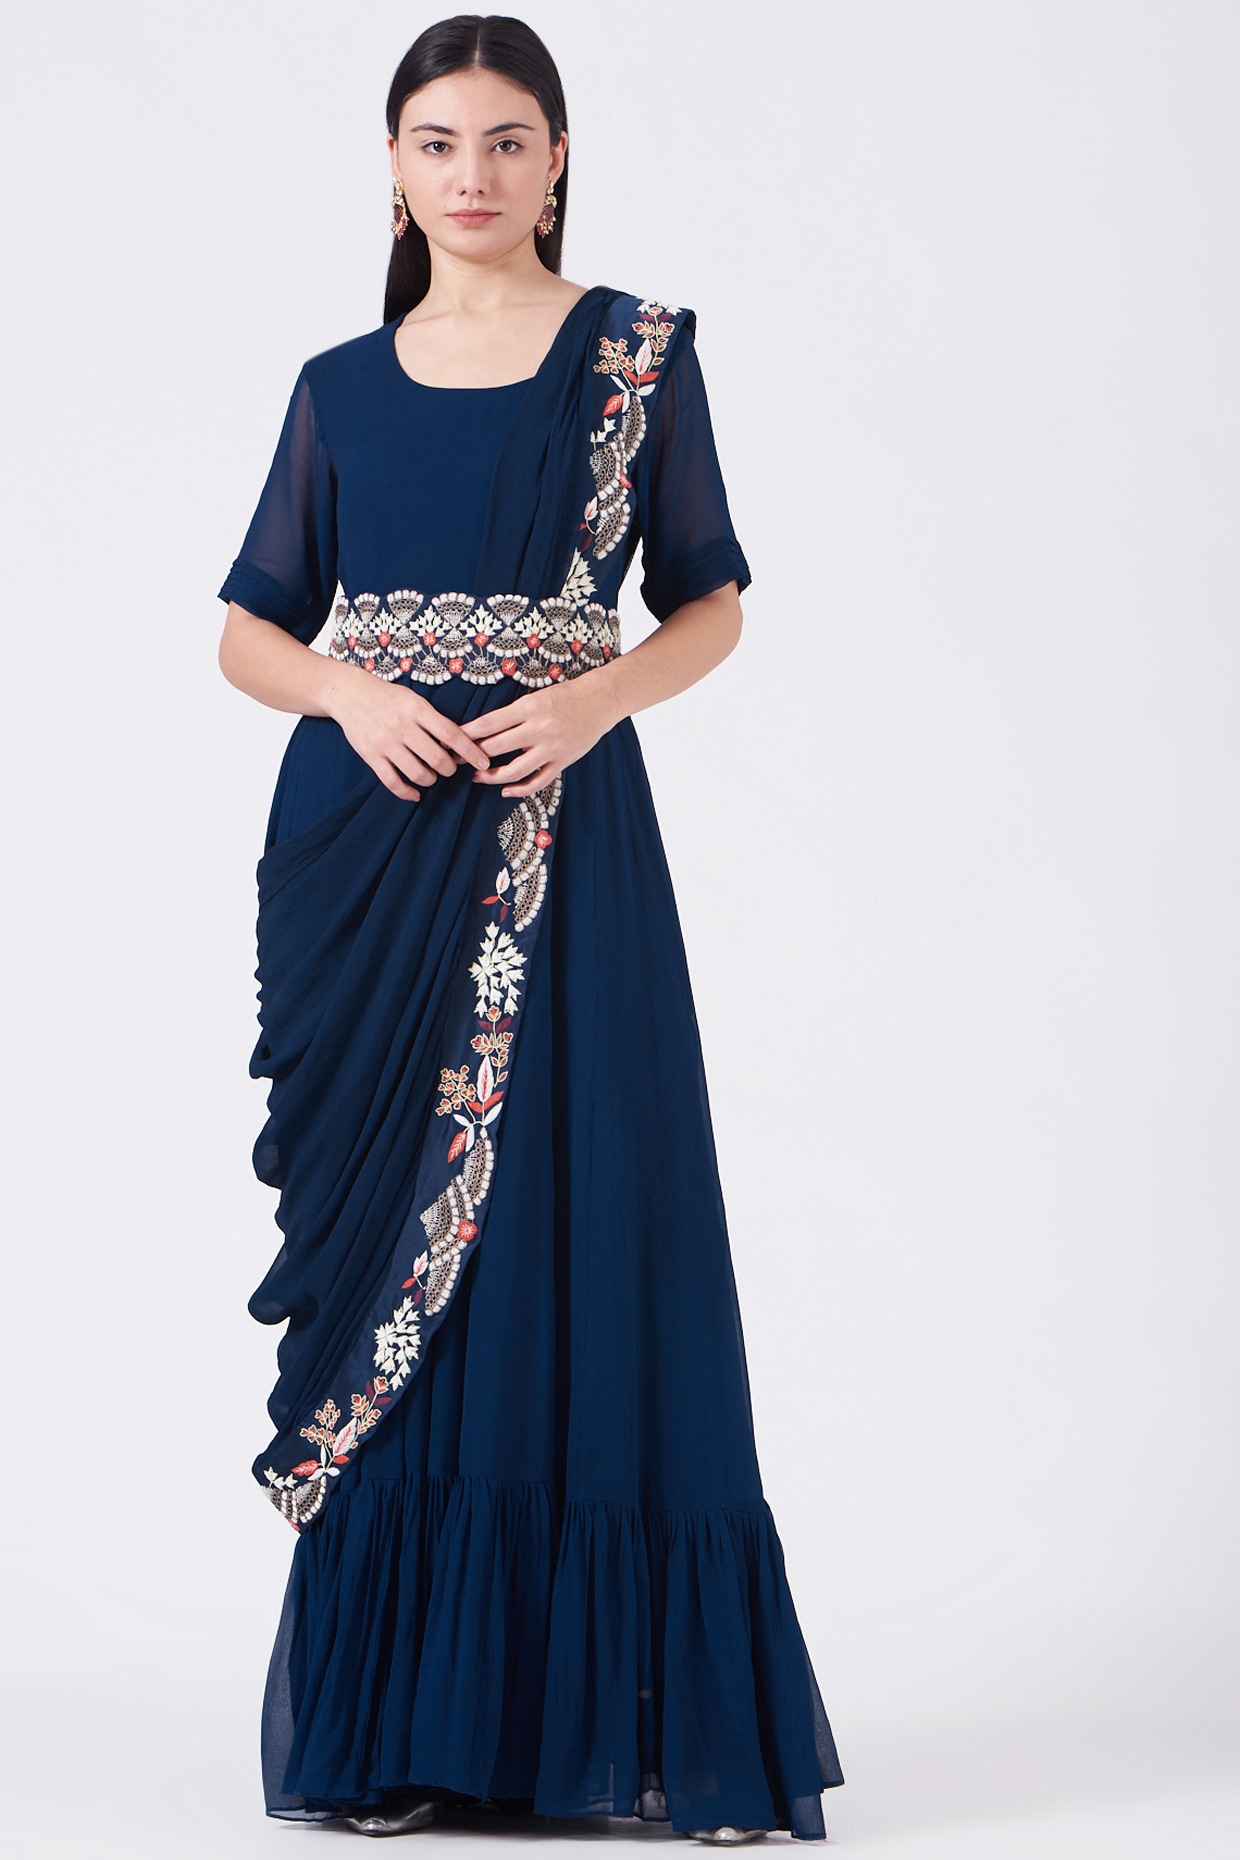 Heavy Embroidery Gown Saree Style